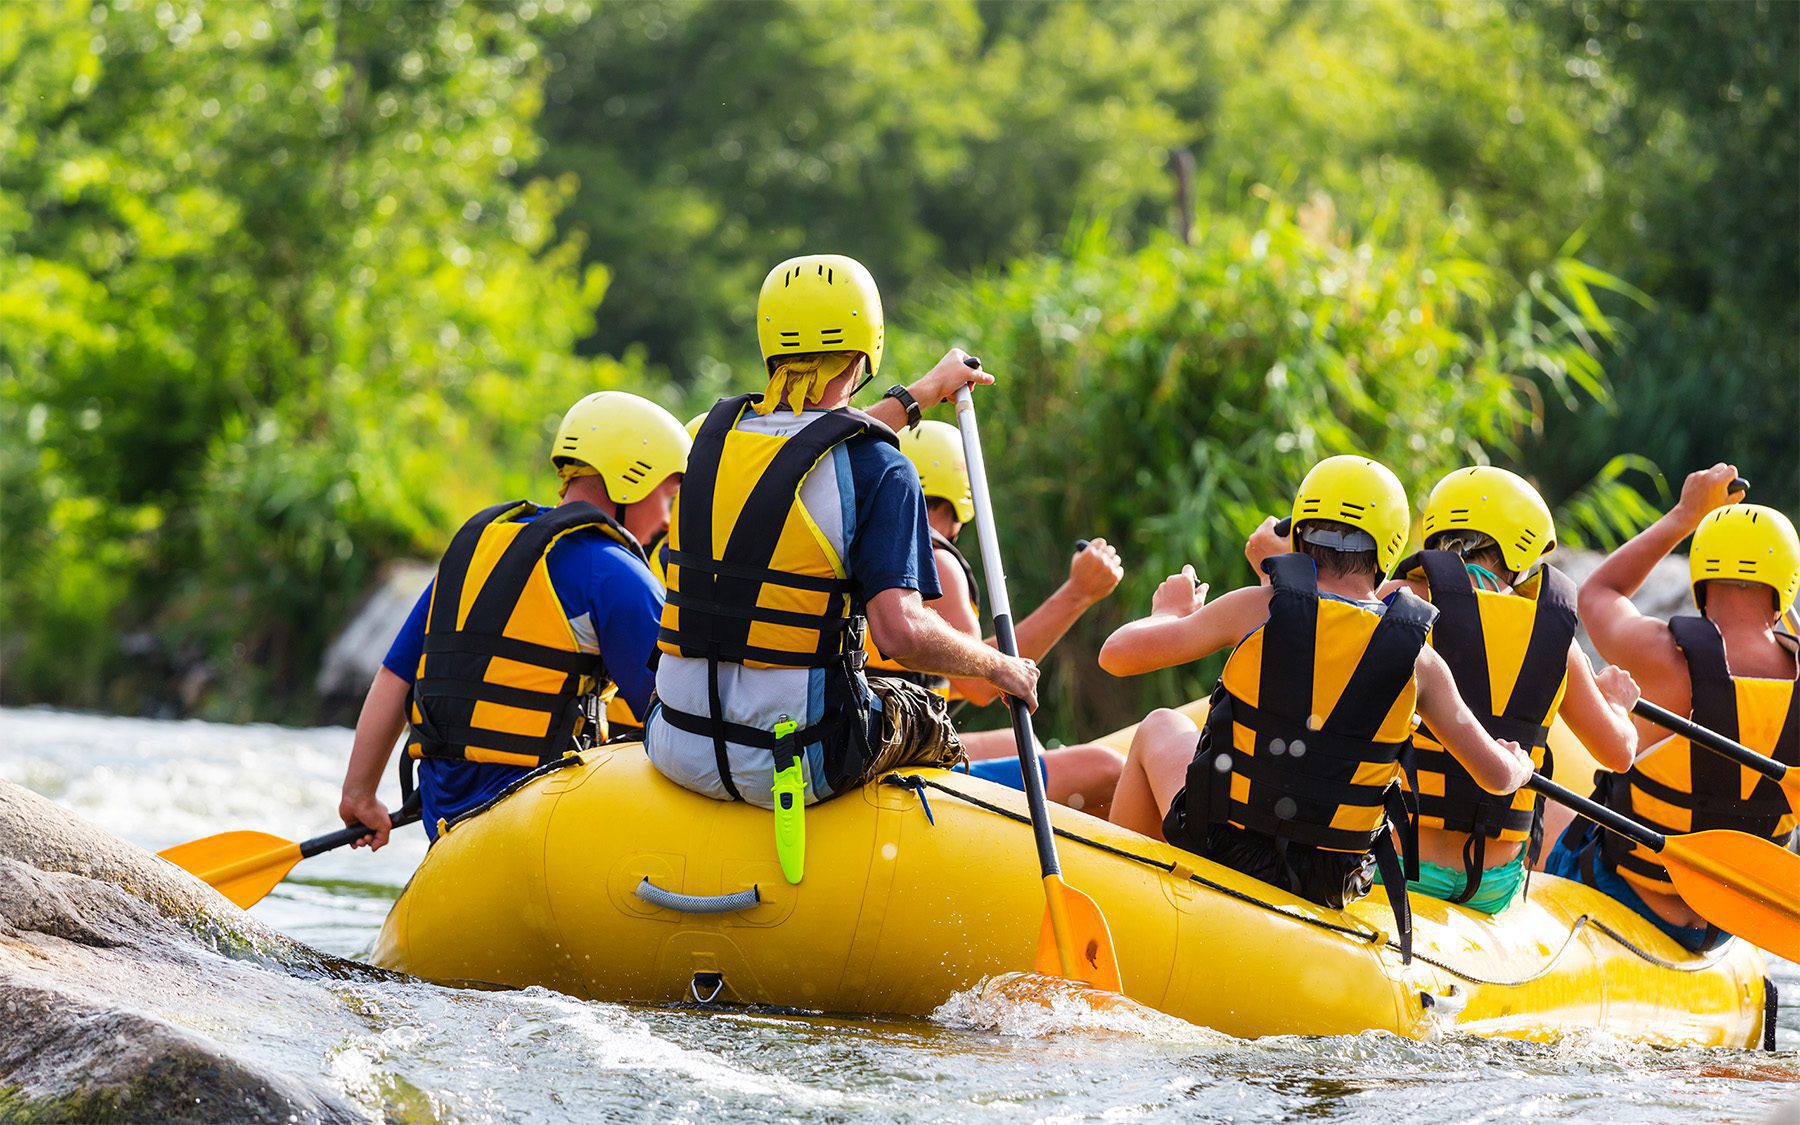 A group of people in full safety gear participate in a rafting excursion on a river.